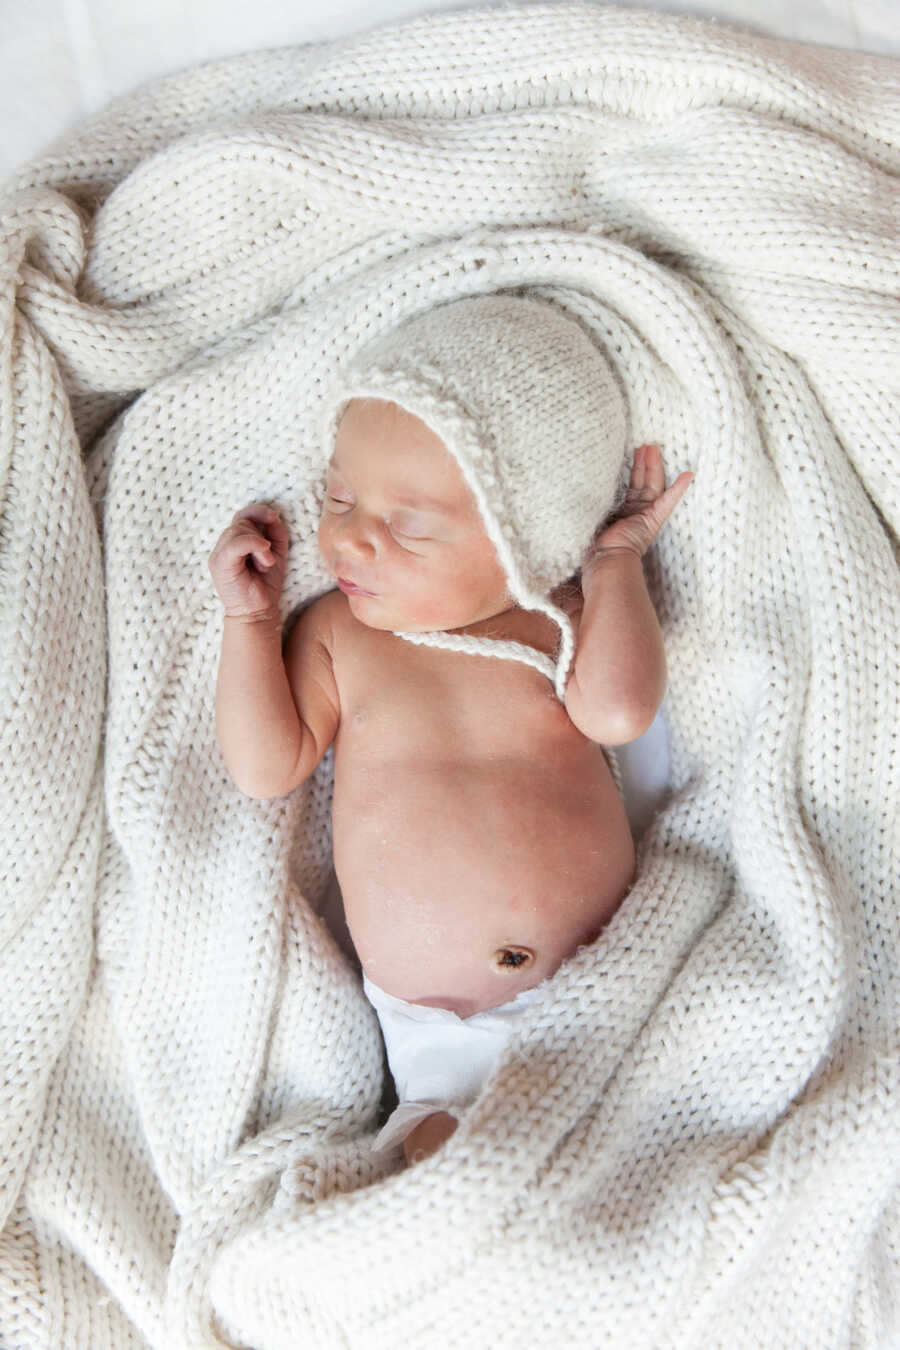 newborn baby sleeping on a white knitted blanket wearing a matching knitted hat